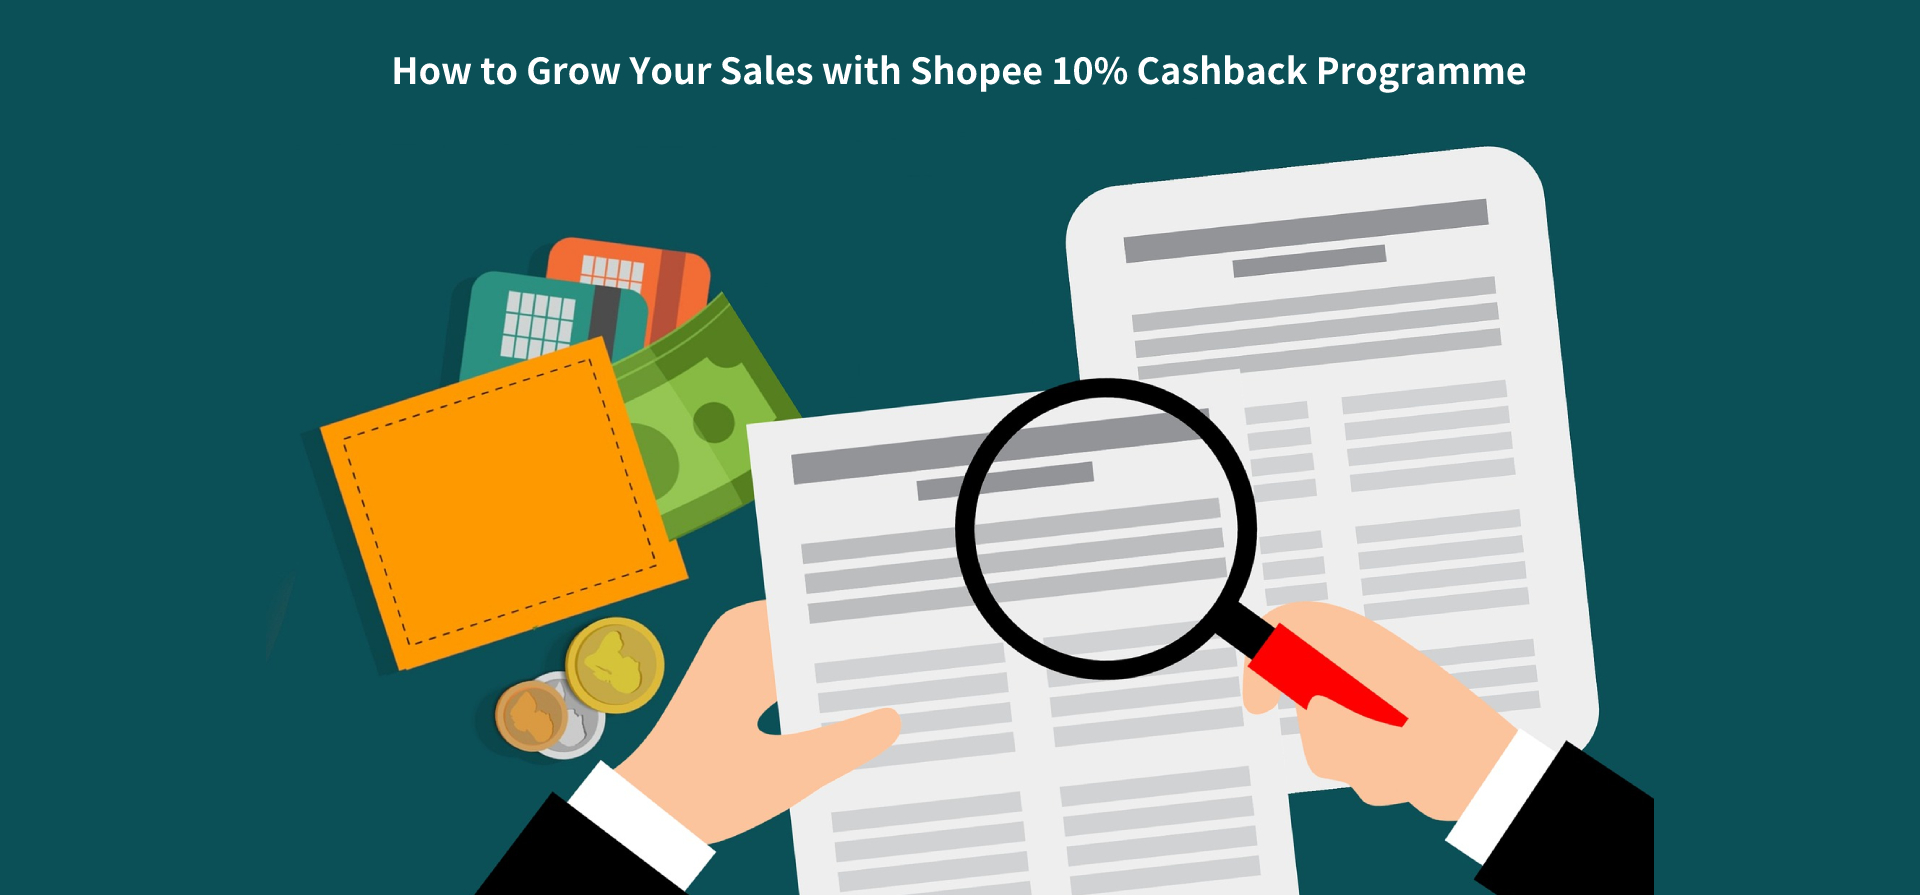 How to Grow Your Sales with Shopee 10% Cashback Programme